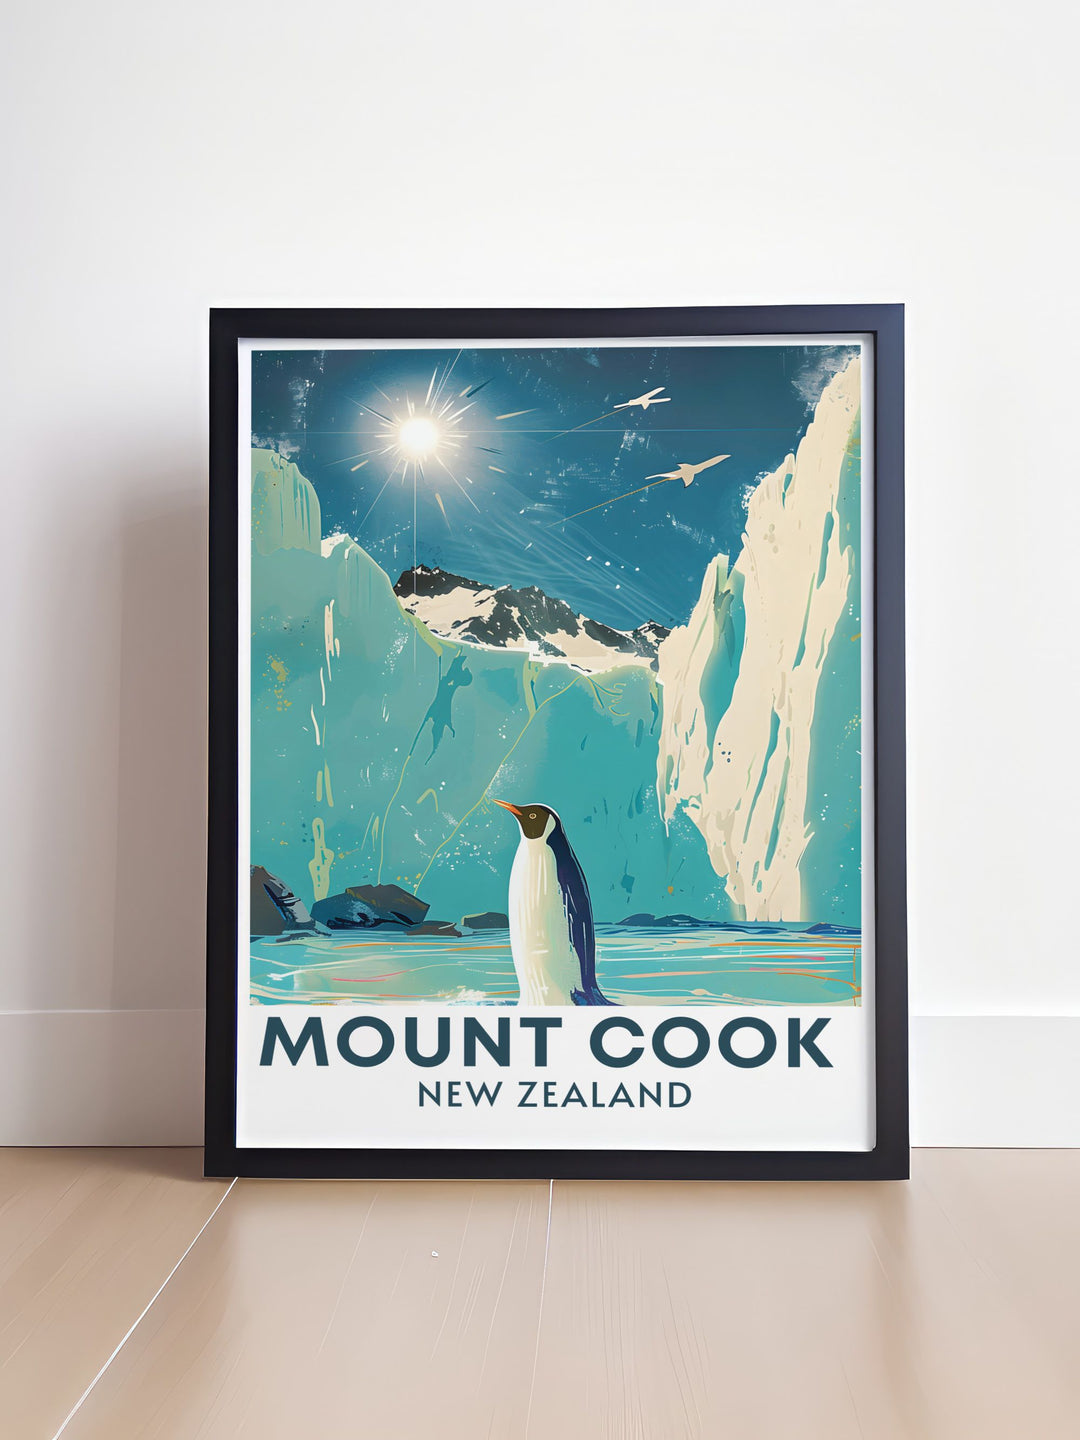 New Zealand gift idea featuring a stunning Tasman Glacier poster this artwork is perfect for birthdays anniversaries or special occasions for those who love travel and nature offering a timeless addition to any collection of bucket list prints